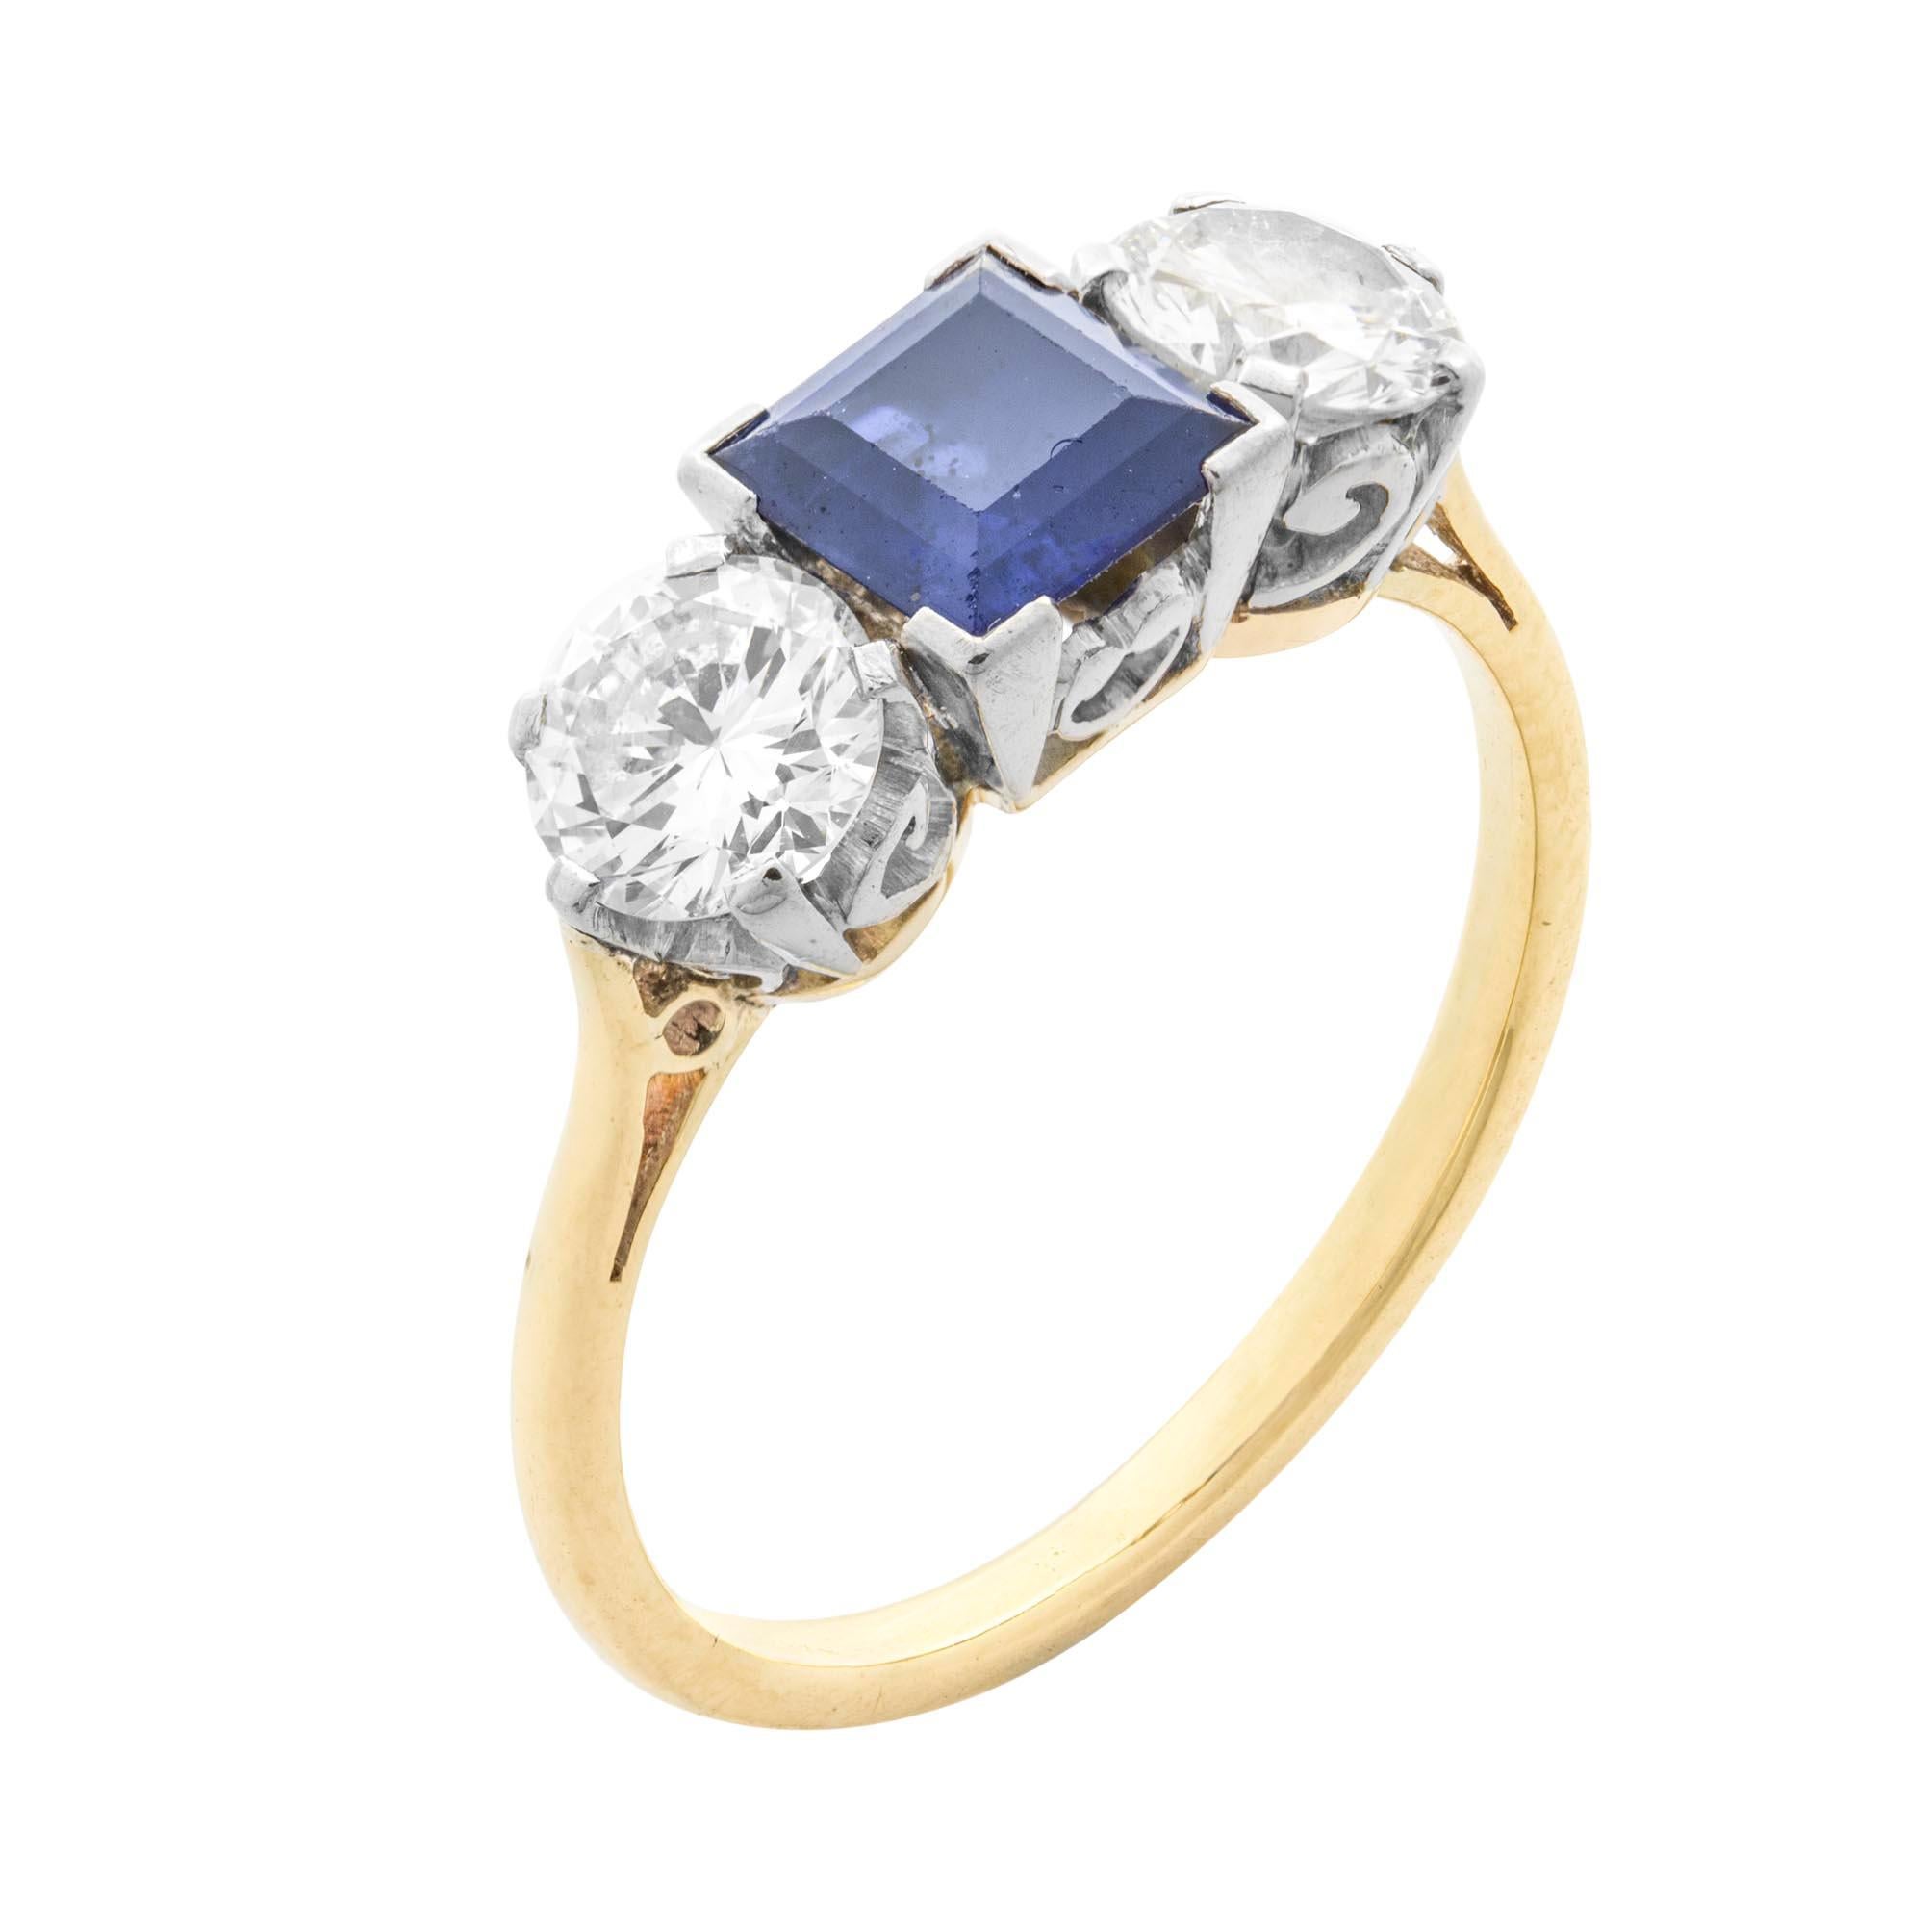 A sapphire and diamond three stone ring, the square-cut sapphire weighing 0.98 carats, set between two round brilliant-cut diamonds, the one weighing 0.49 carats of F colour and SI2 clarity, the other weighing 0.46 carats of F colour and SI1